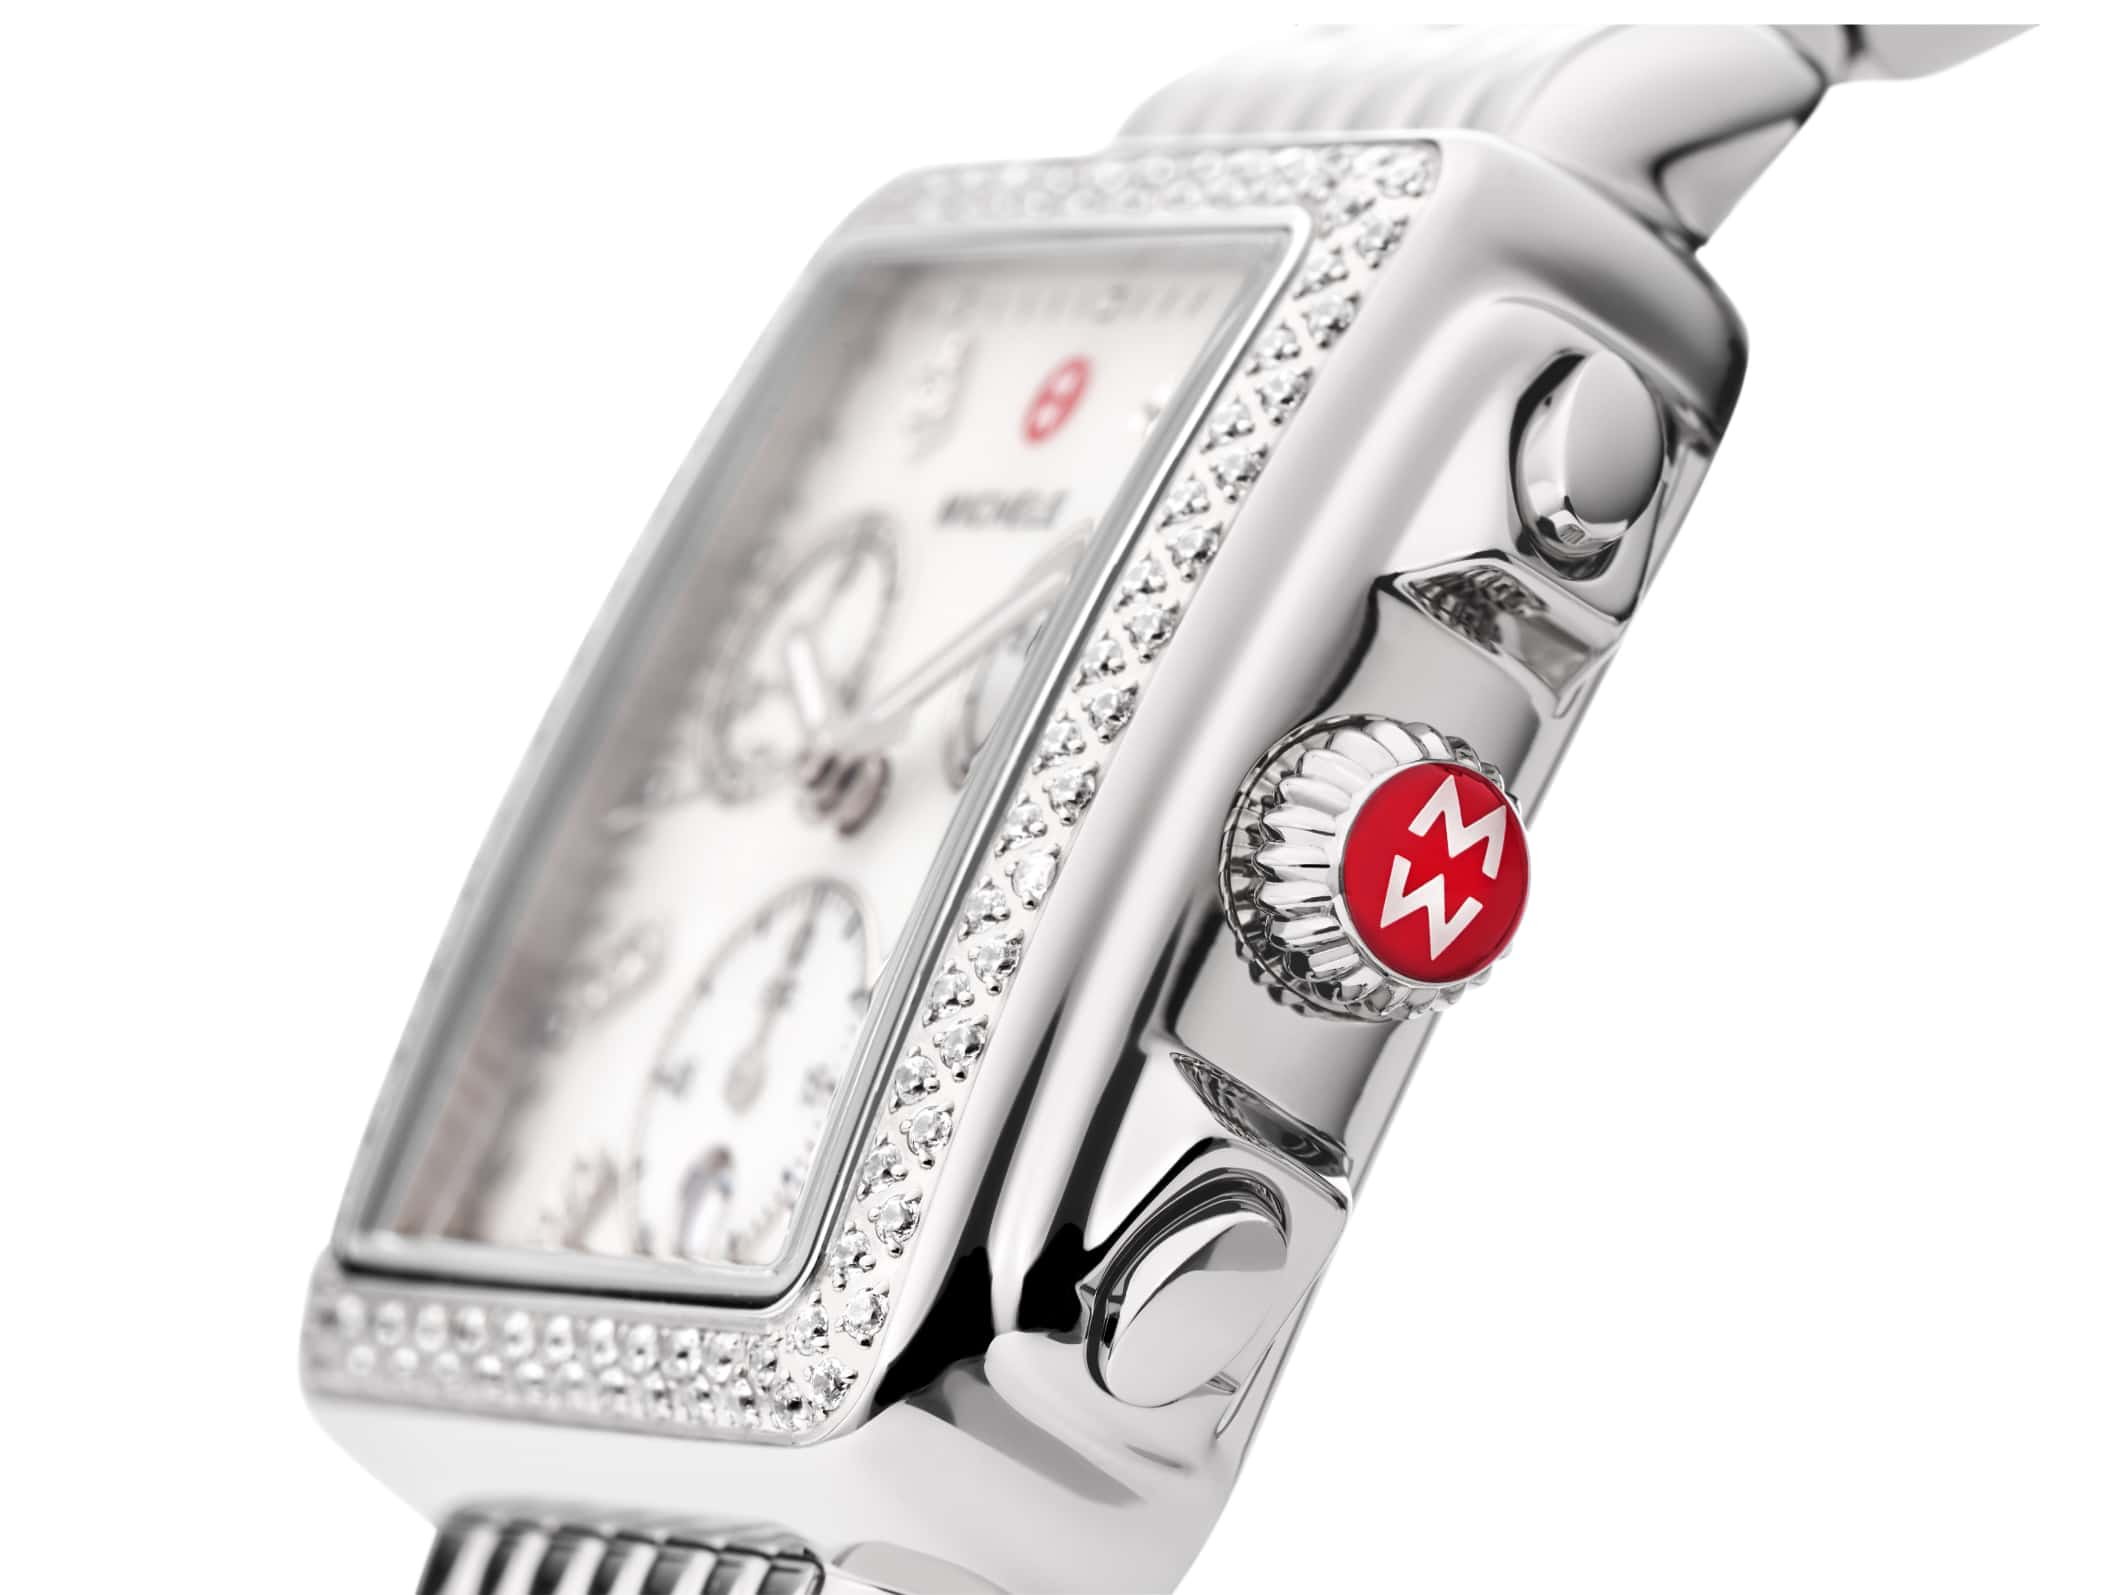 One Deco watch in stainless steel.